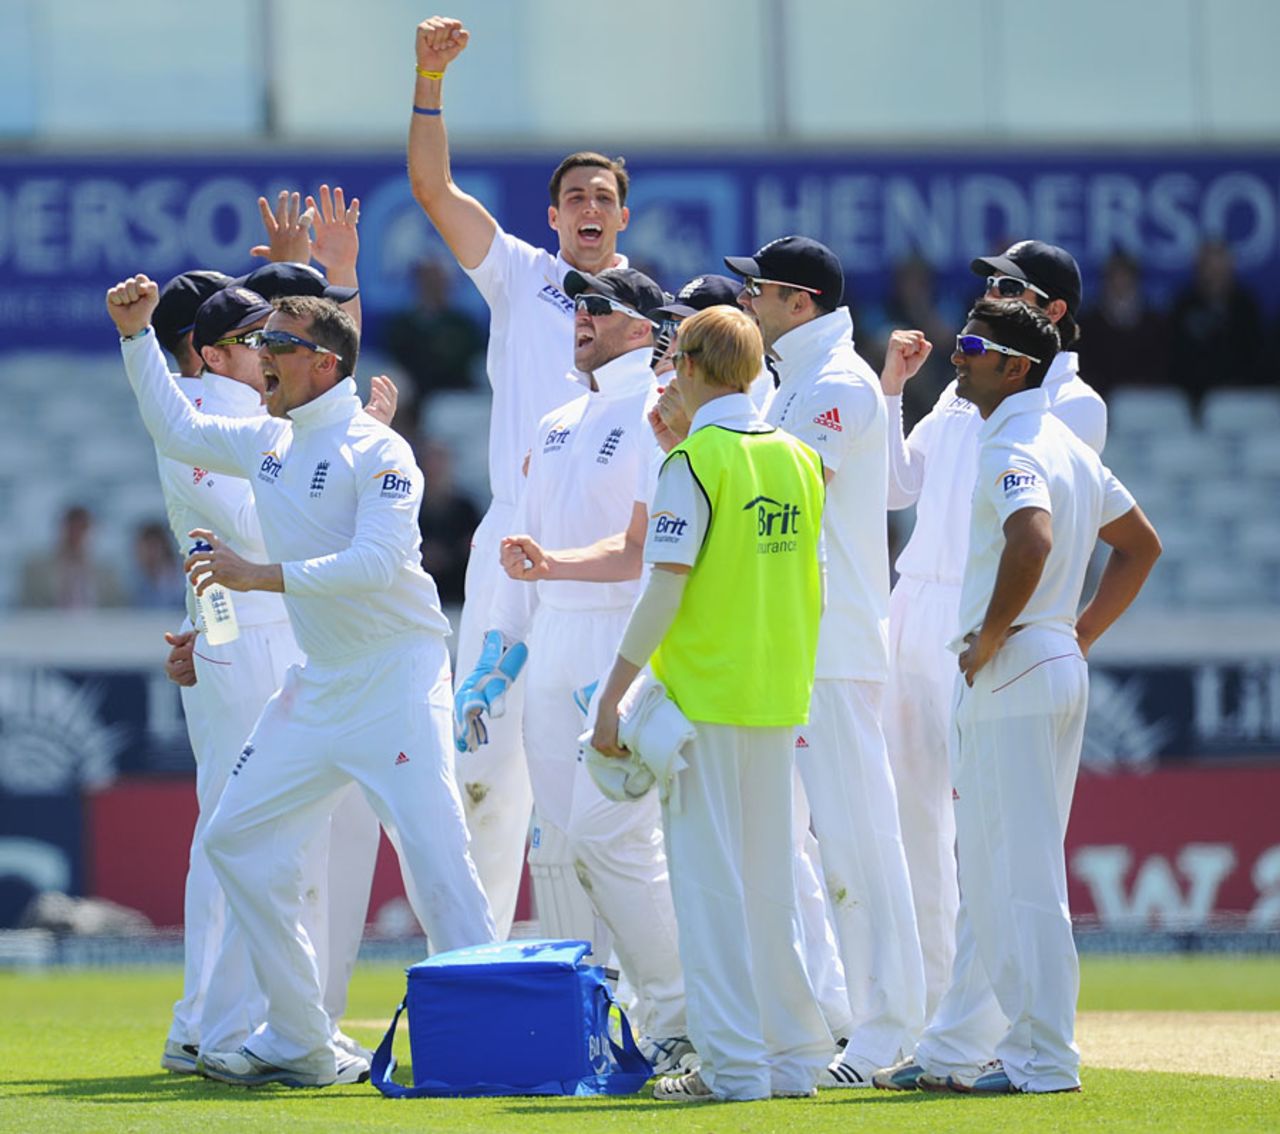 England celebrate as they win a review against Kane Williamson, England v New Zealand, 2nd Investec Test, Headingley, 3rd day, May 26, 2013